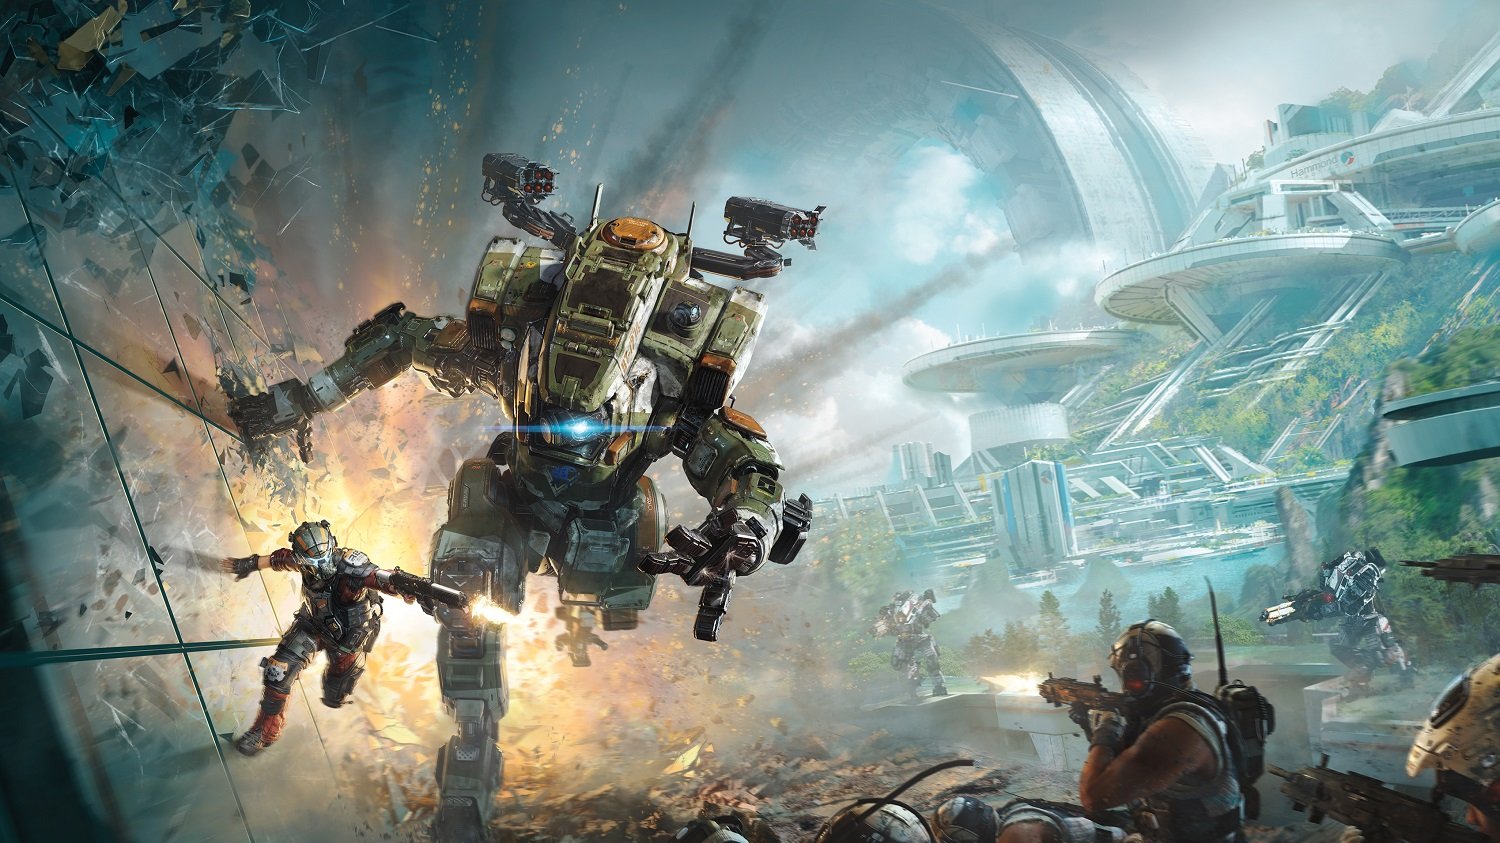 Titanfall 2 promotional artwork -- Jason Garza says the remaining Respawn Entertainment Titanfall team consists of 'one or two' people